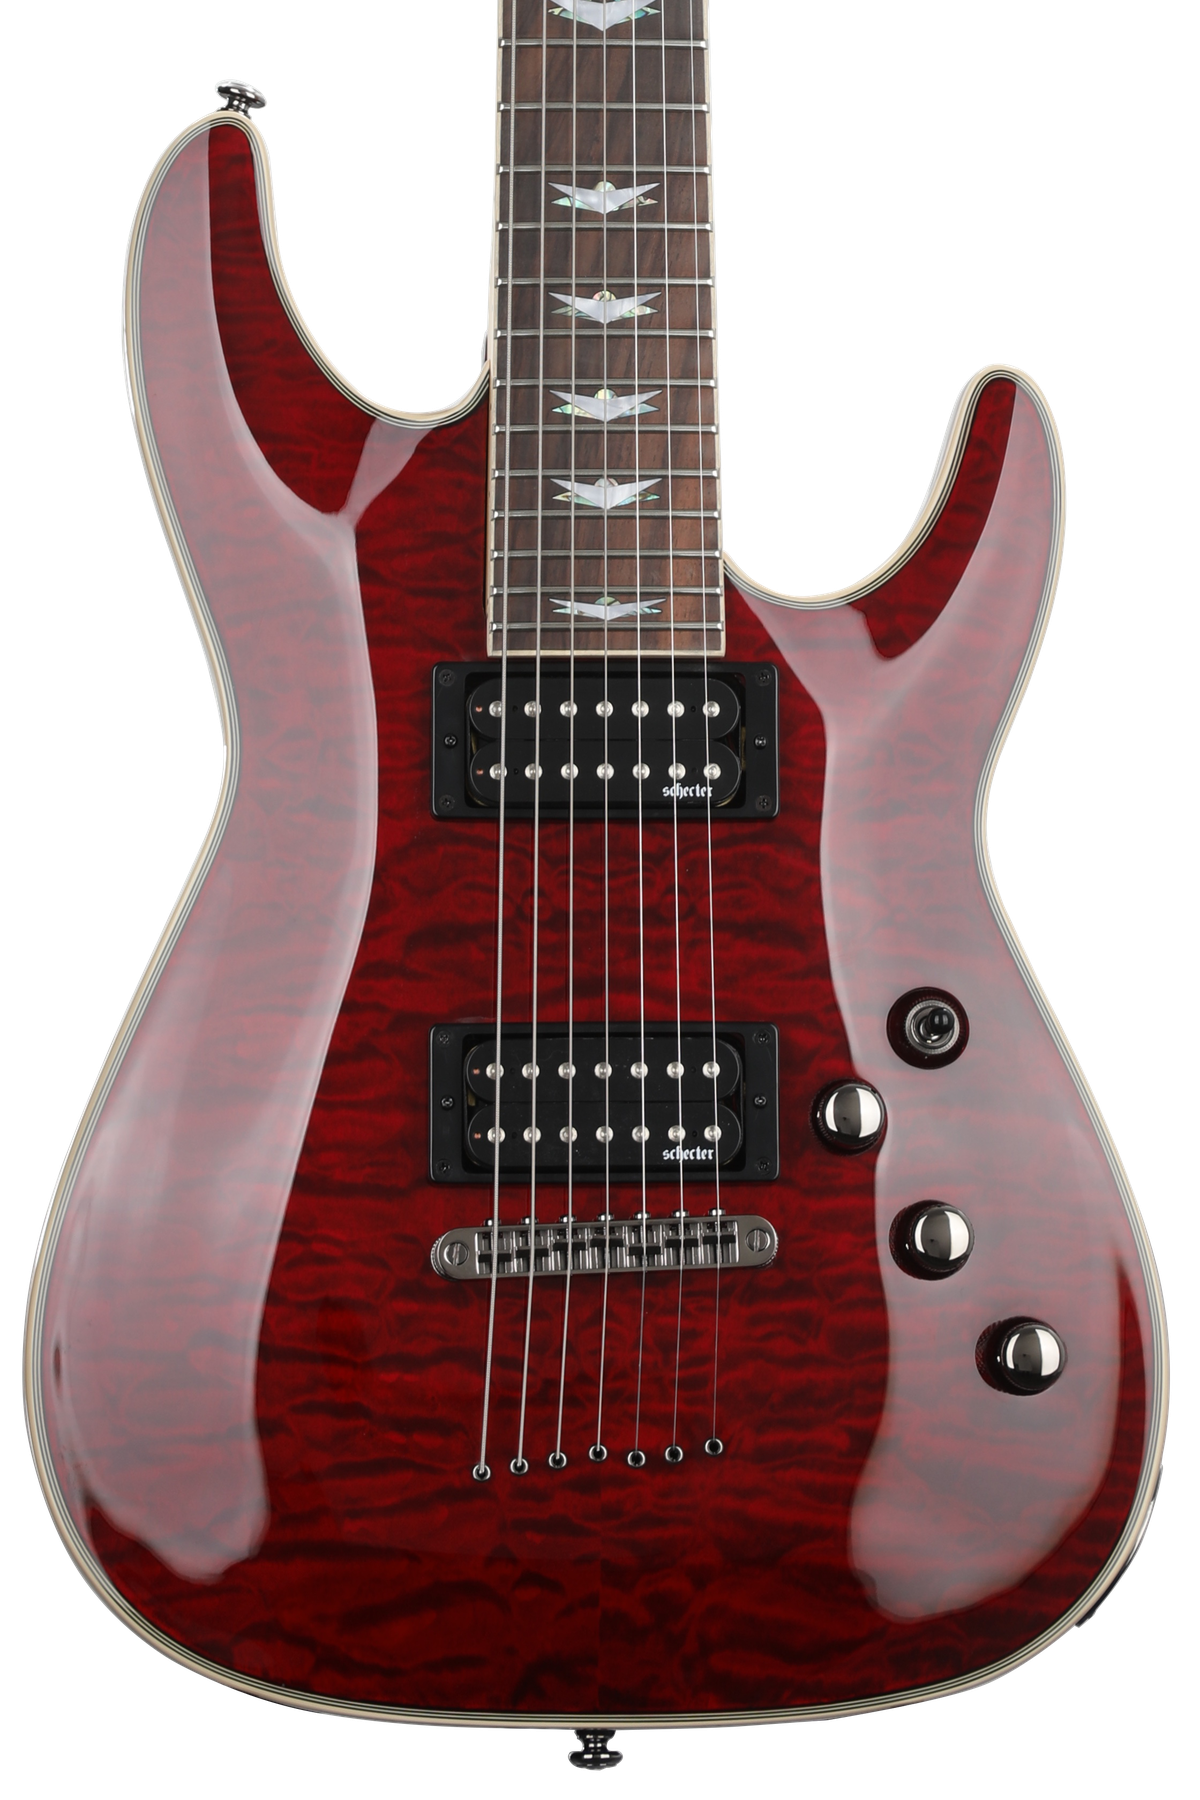 Schecter Omen Extreme-7 Electric Guitar - Black Cherry